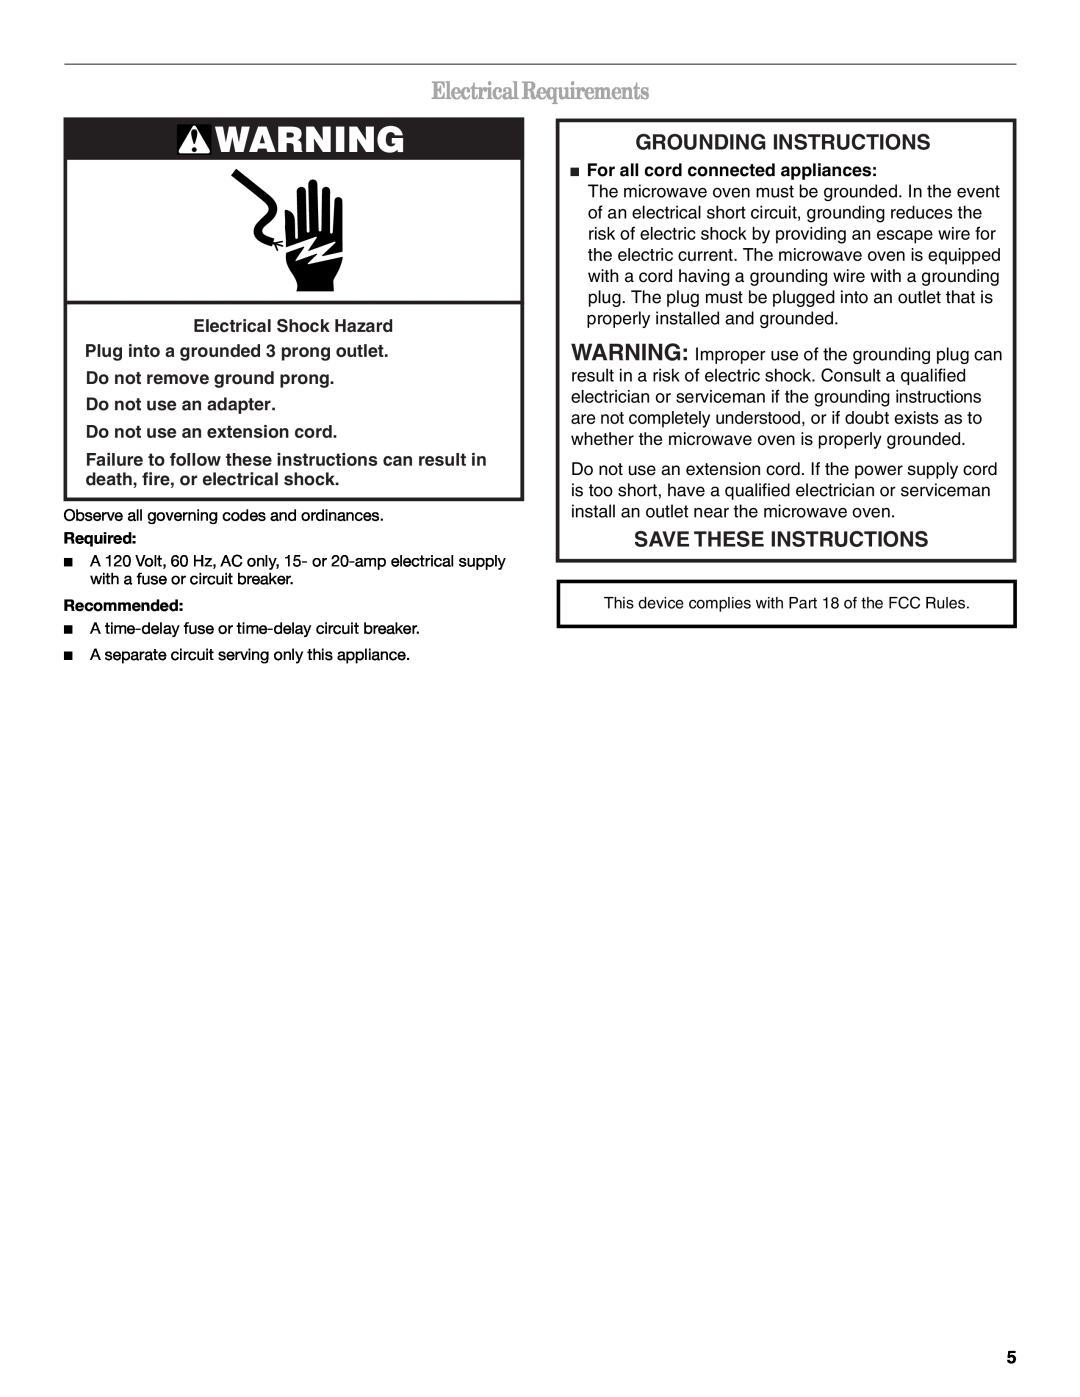 Whirlpool GH6208XR Electrical Requirements, Grounding Instructions, Save These Instructions, Do not use an extension cord 